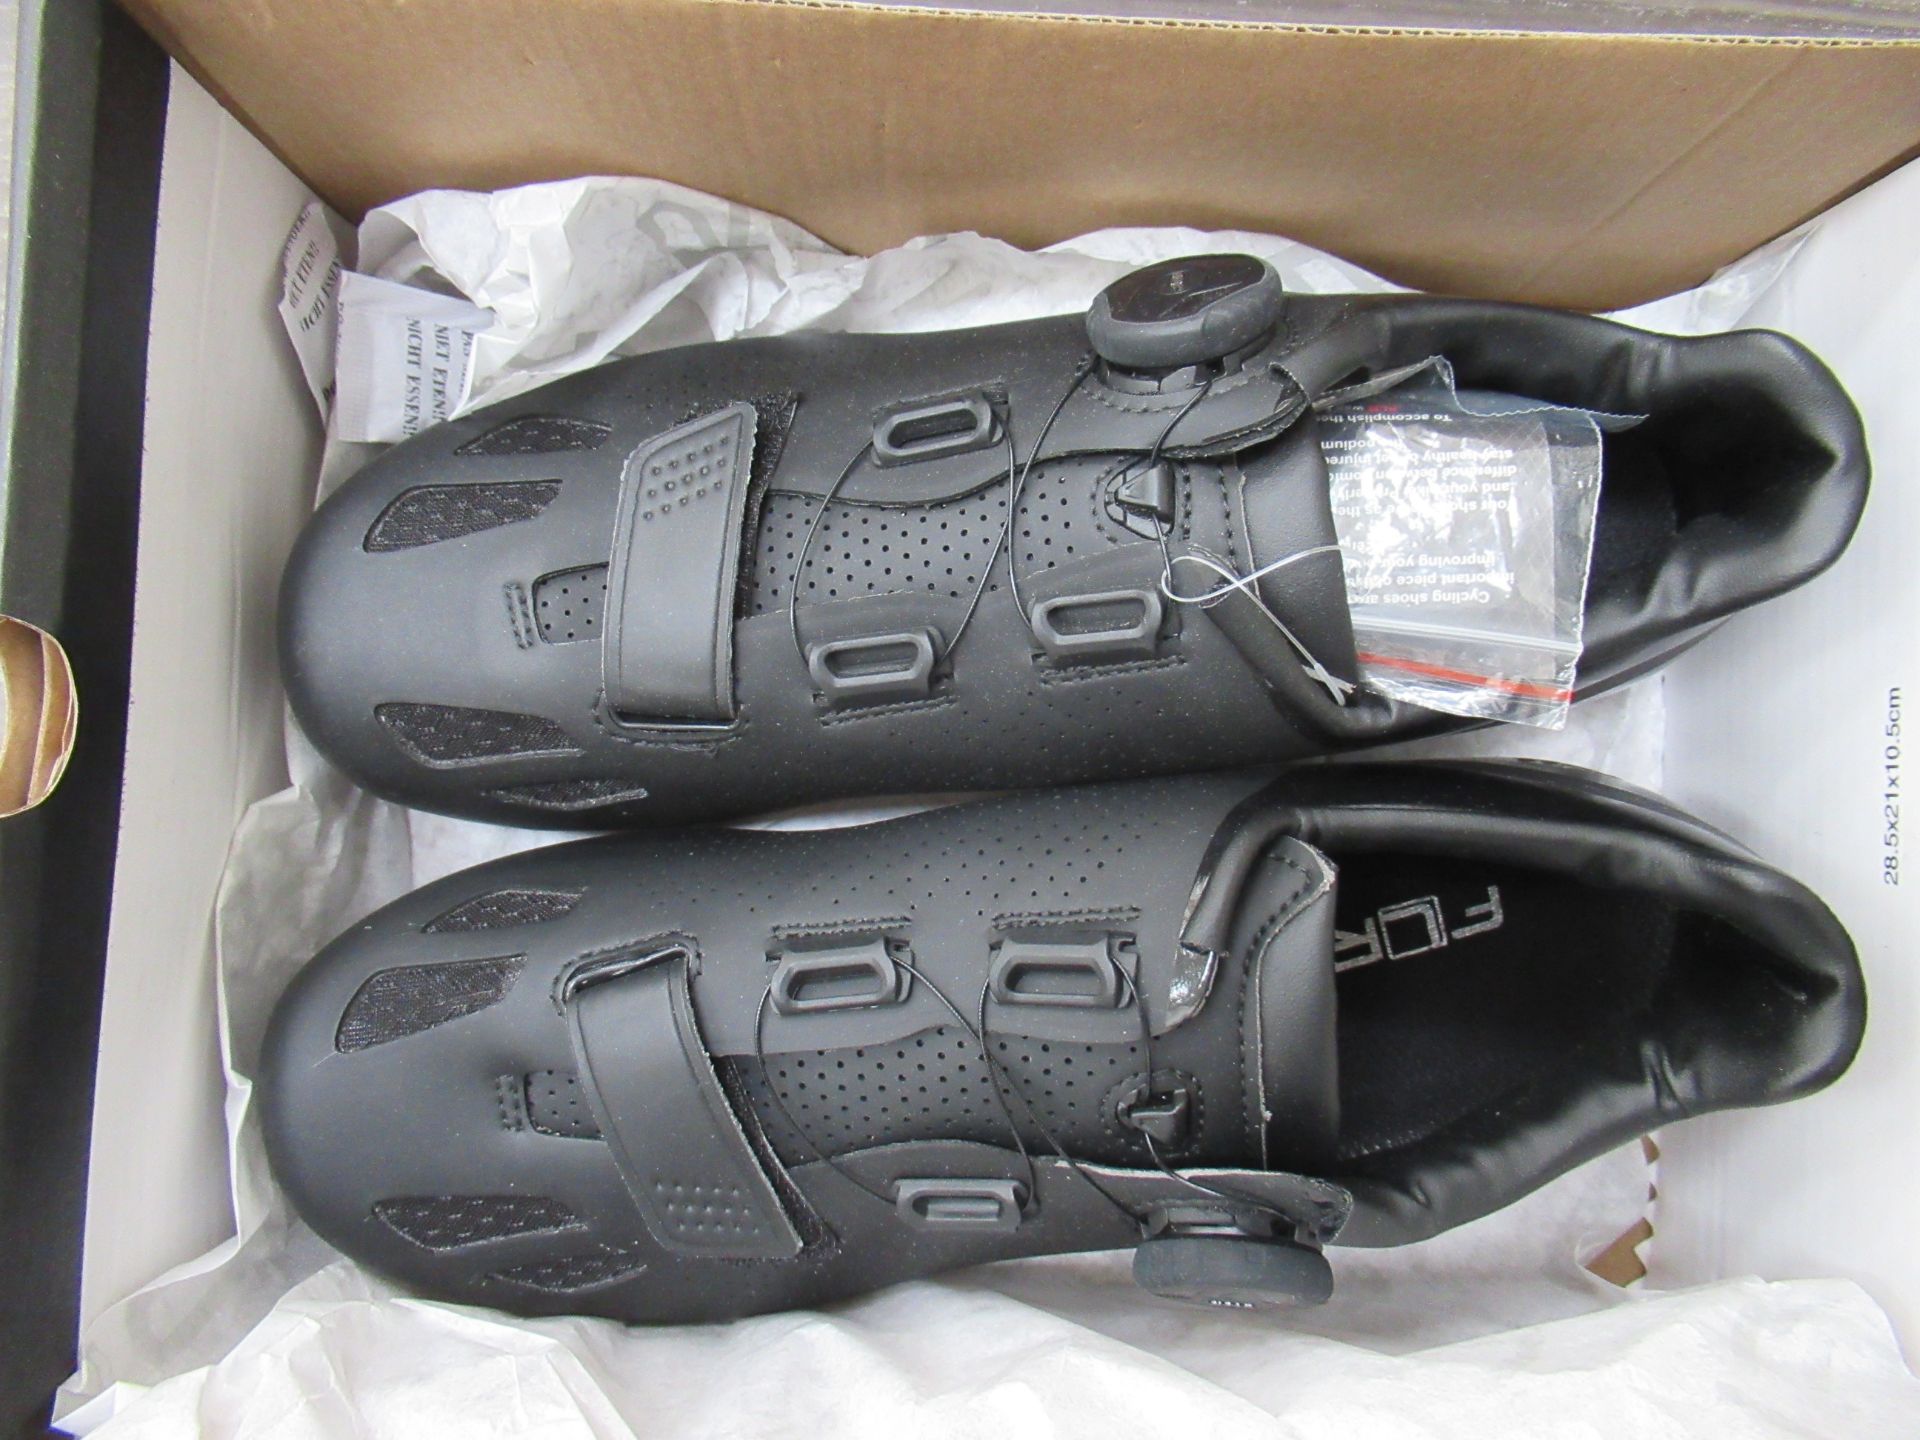 2 x Pairs of FLR cycling shoes - 1 x F-11 boxed EU size 39 (RRP£99.99) and 1 x F-35 III boxed EU siz - Image 6 of 7